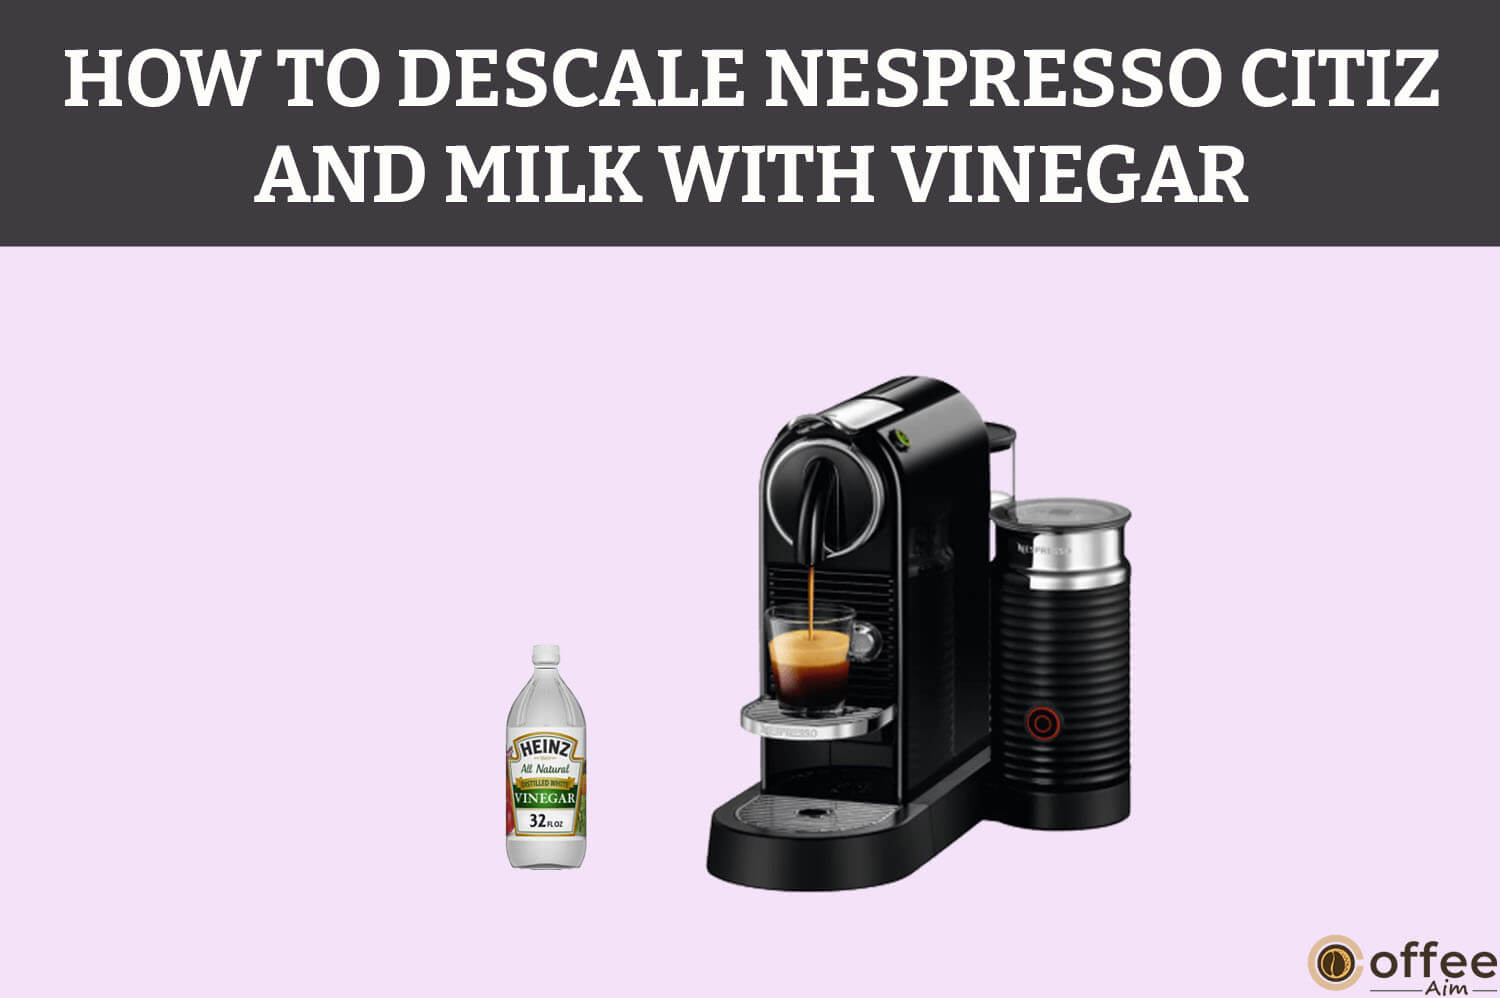 Featured image for the article "How to Descale Nespresso CitiZ And Milk with Vinegar"